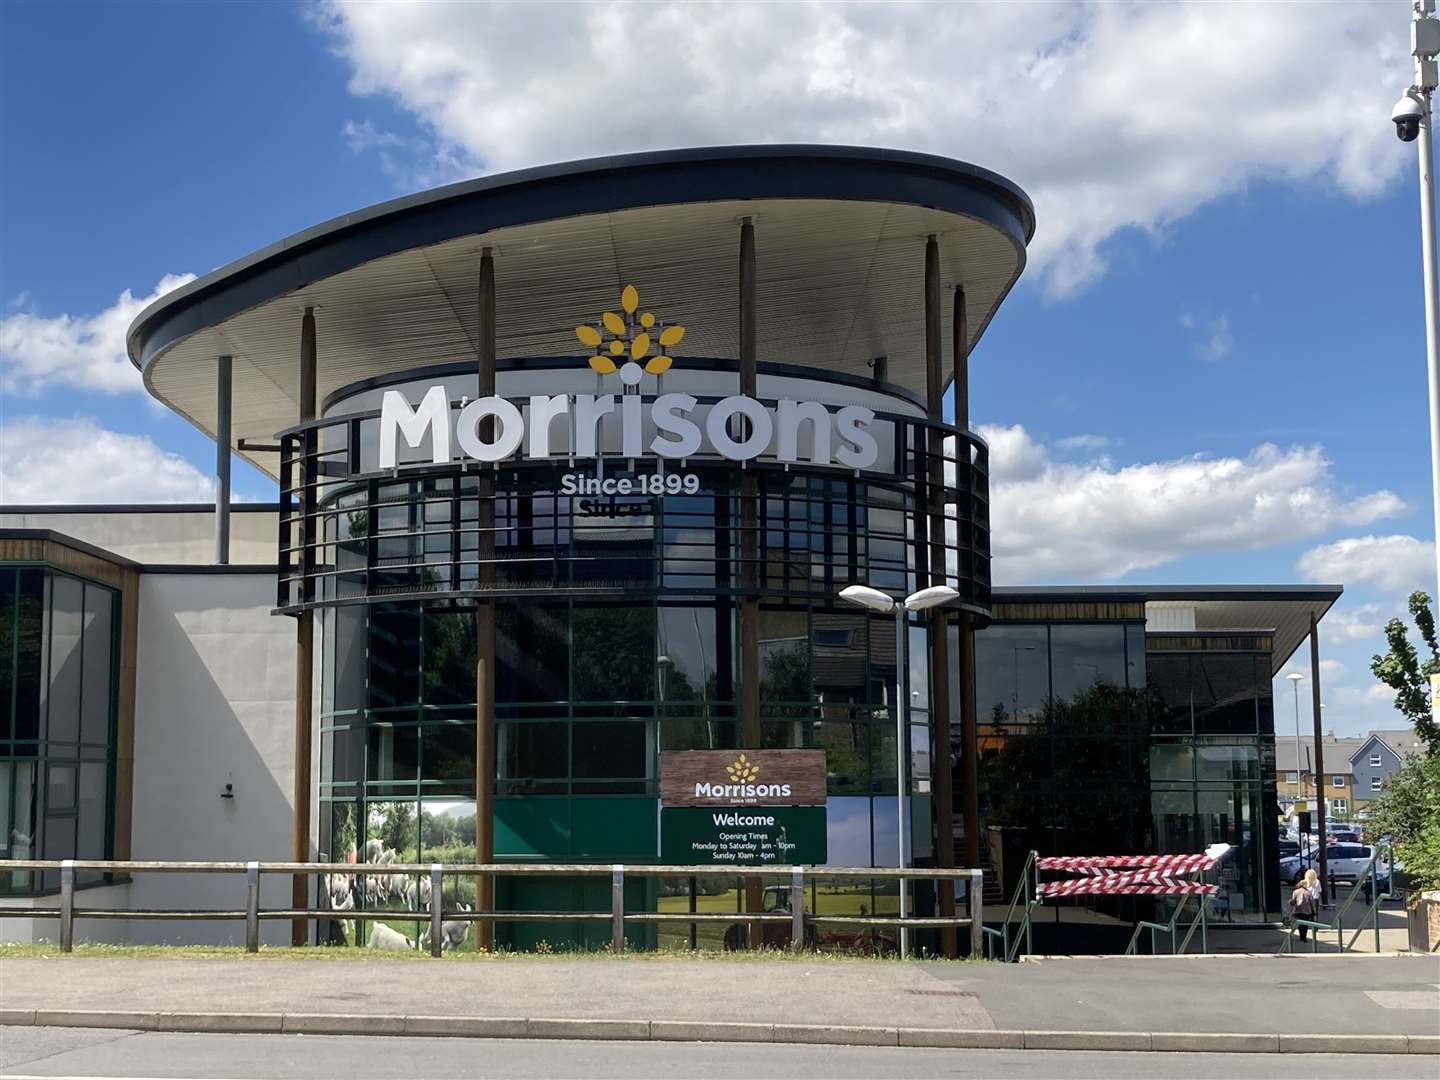 The Morrisons store in Mill Way, Sittingbourne, has seen problems with anti-social behaviour